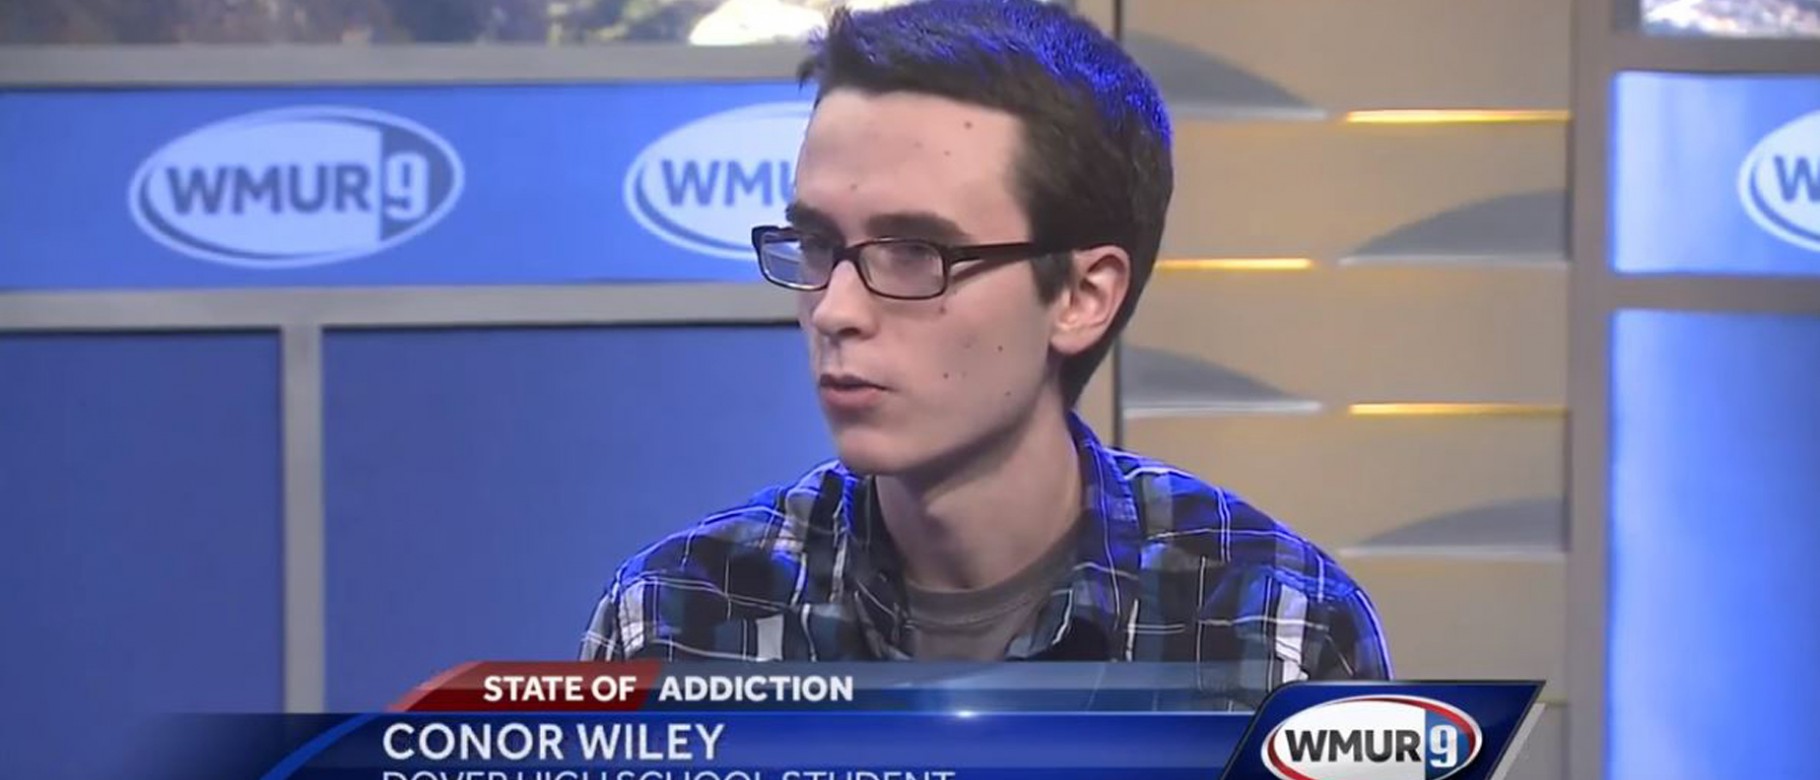 Conor Wiley is interviewed on television station WMUR in 2017 as part of a panel discussion about the opioid crisis. Wiley prese